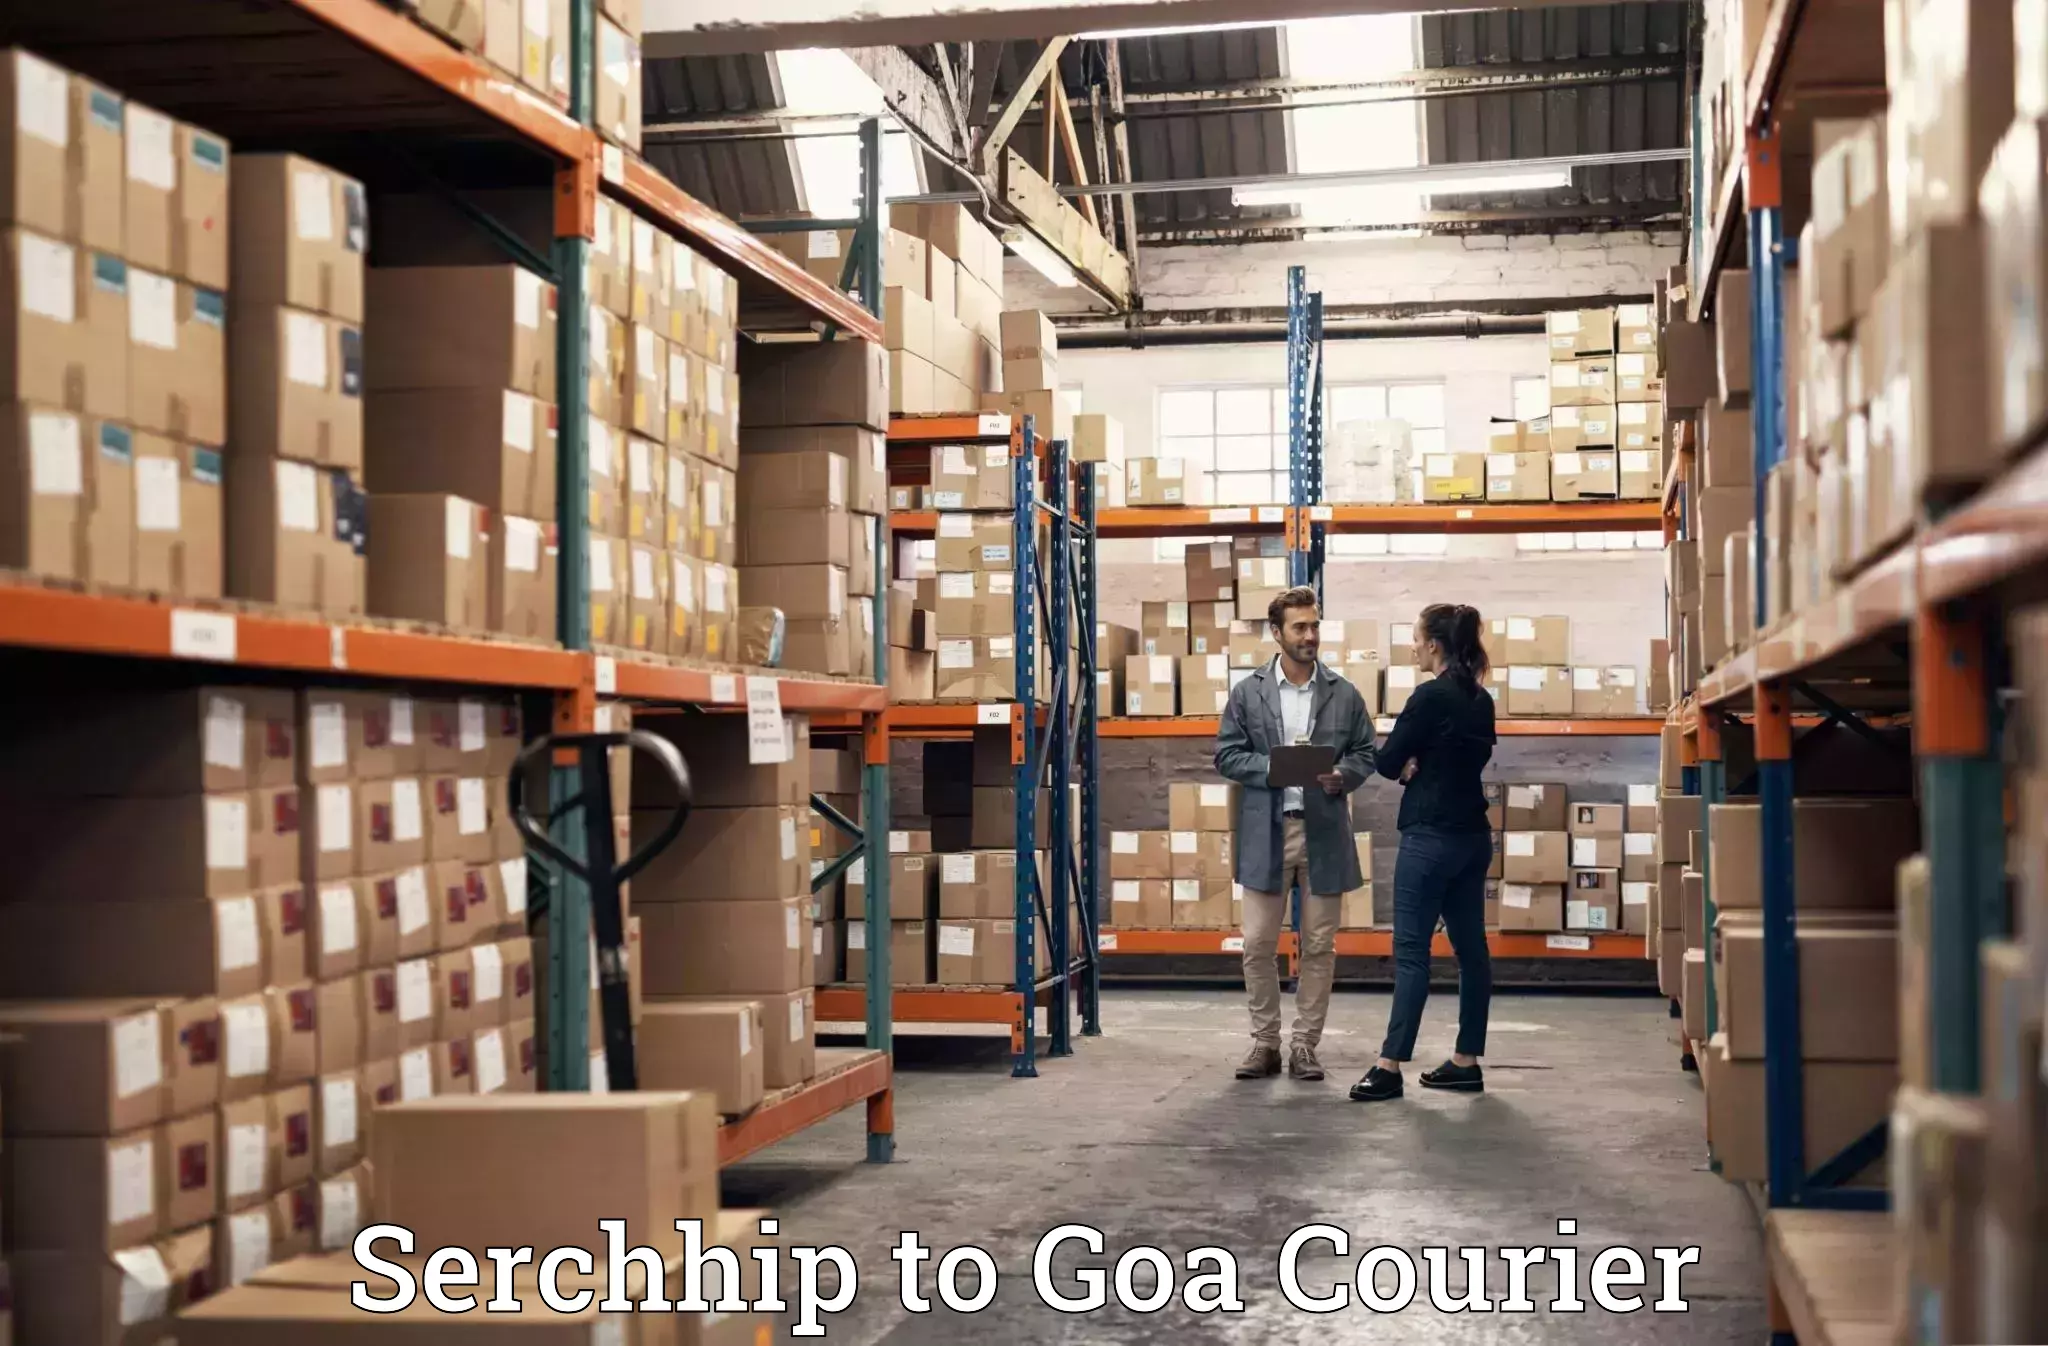 Moving and packing experts Serchhip to South Goa